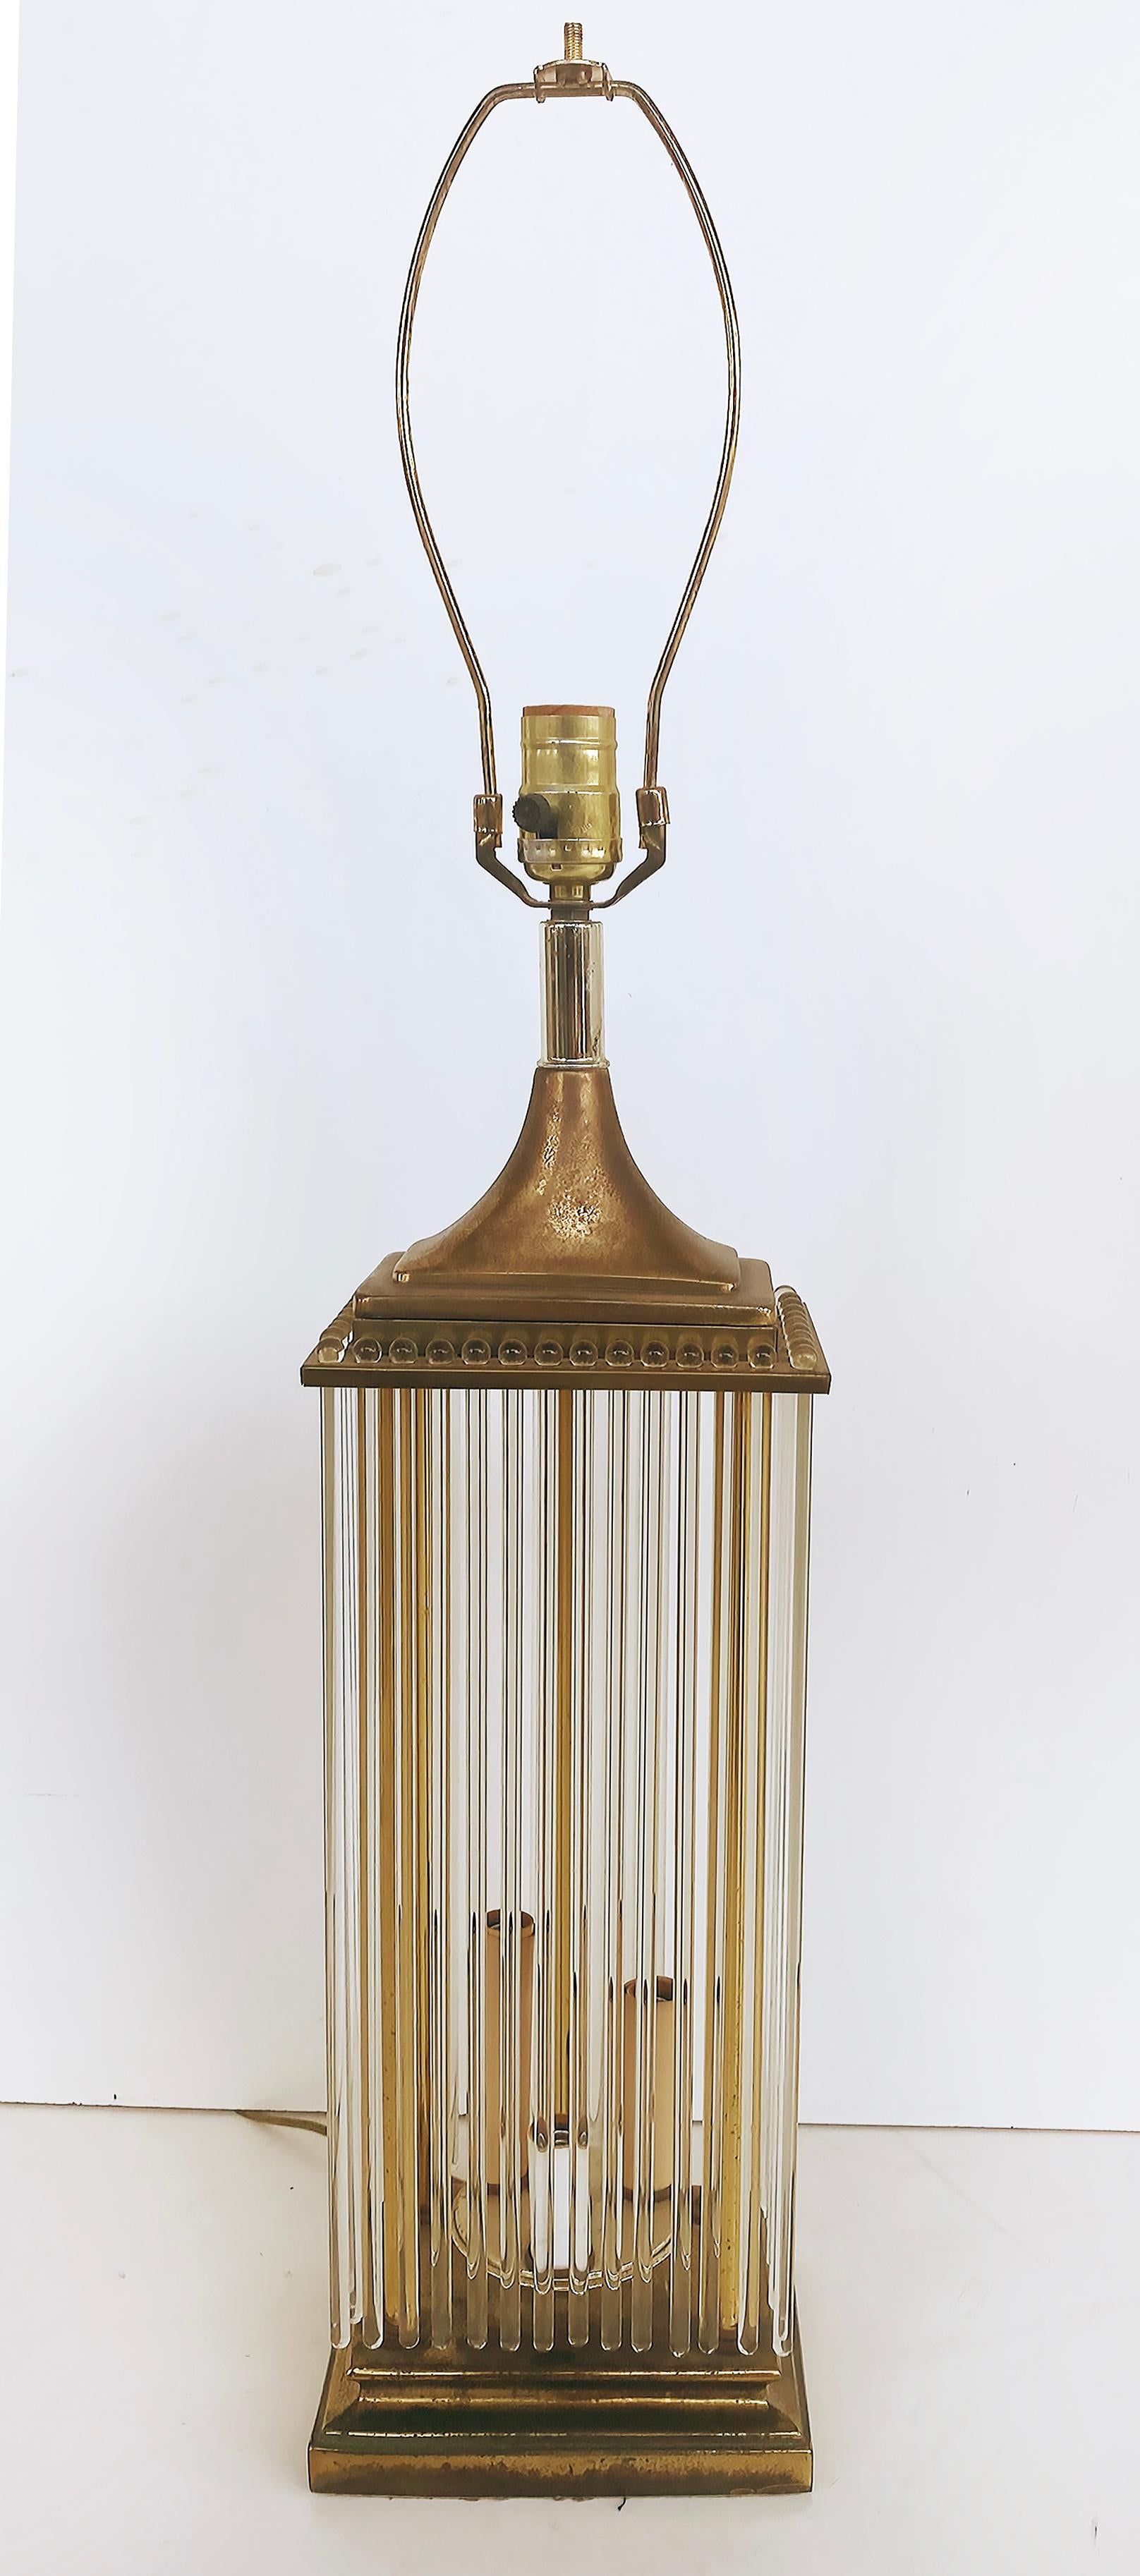 Brass and Glass Rod Table Lamps, Gaetano Sciolari Lightolier Attributed Pair

Offered for sale is a pair of brass and glass rod table lamps attributed to Gaetano Sciolari for Lightolier. The base lights up with 3 lower sockets that are staggered in